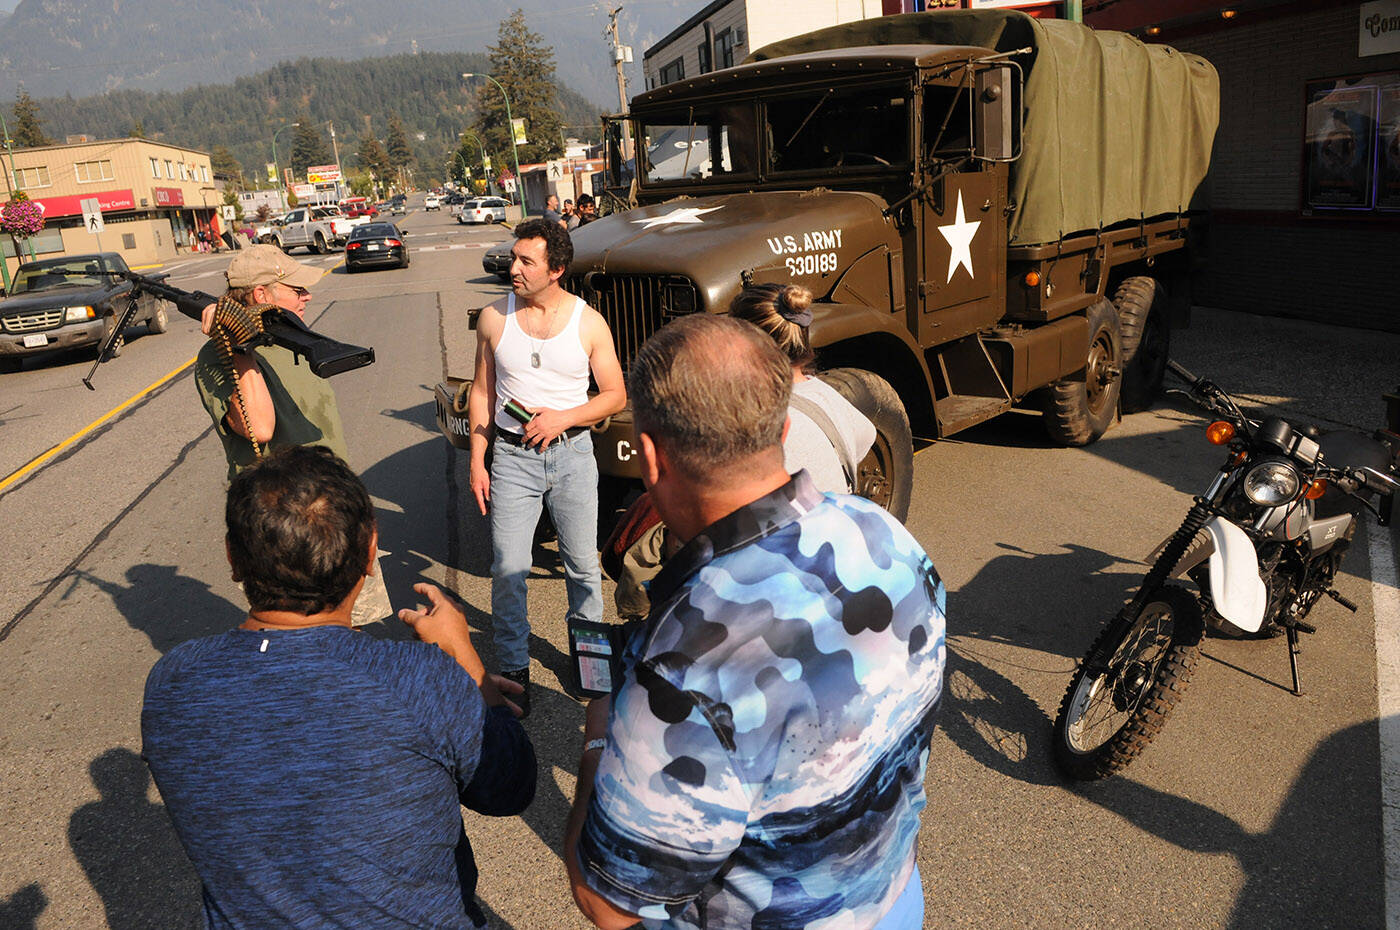 Fans check out some of the vehicles on display during the Rambo First Blood 40th Anniversary celebrations in Hope on Saturday, Oct. 8, 2022. (Jenna Hauck/ Black Press Media)